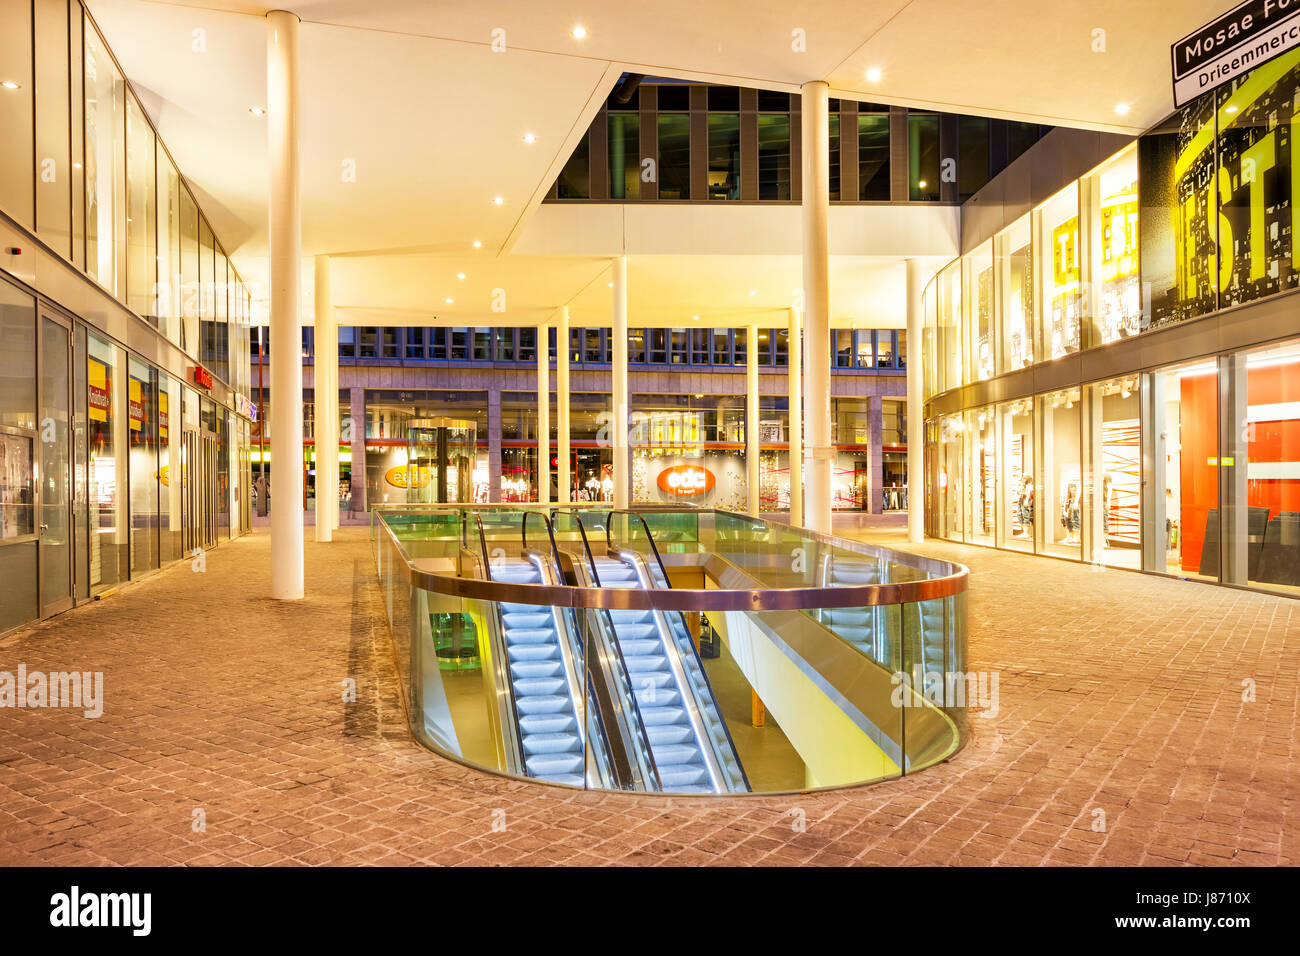 Exterior of some Mosae Forum shopping area stores in downtown Maastricht, Netherlands Stock Photo